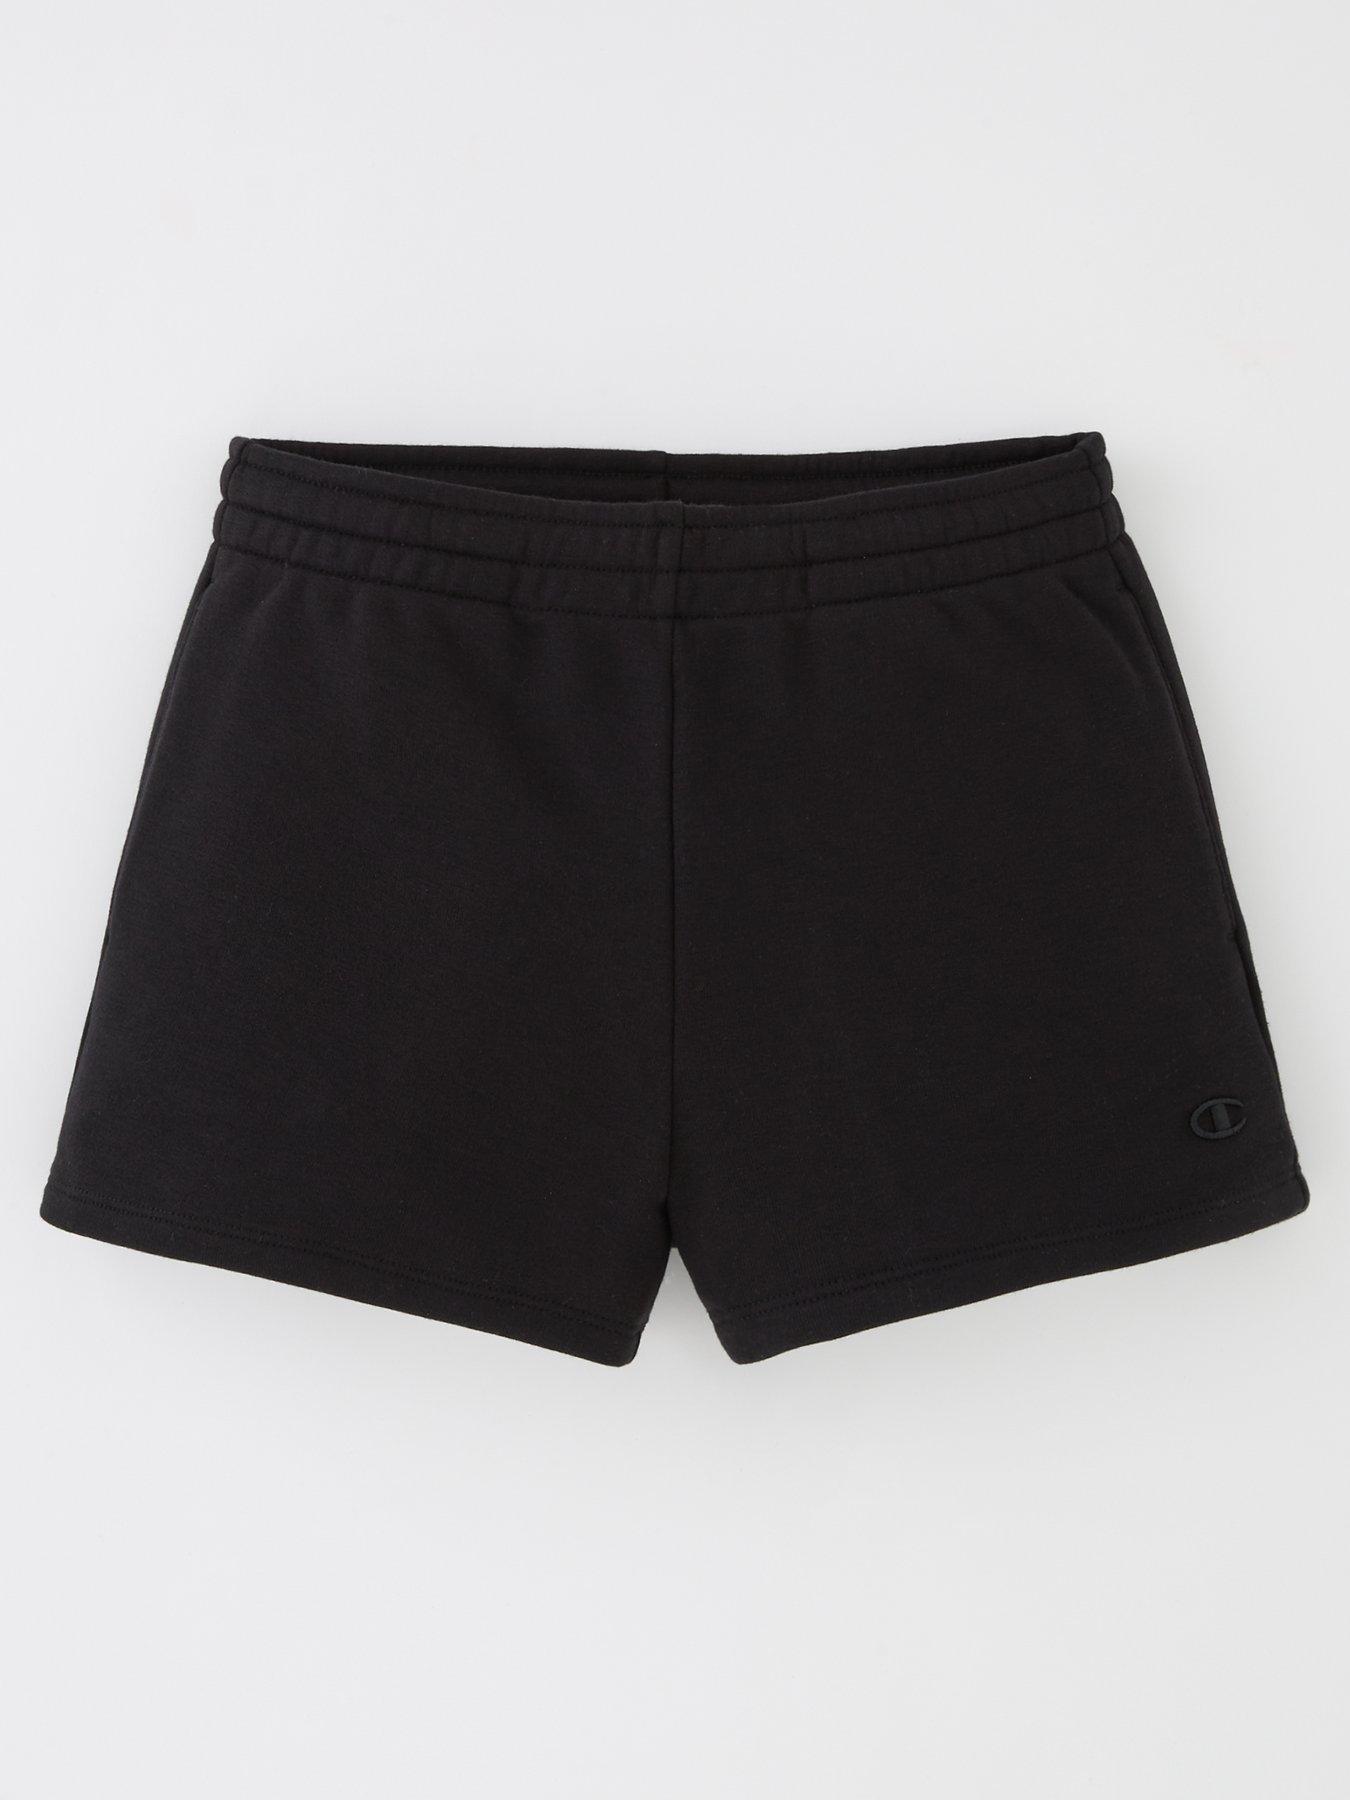 UNDER ARMOUR Girls Armour Shorty Shorts - Black